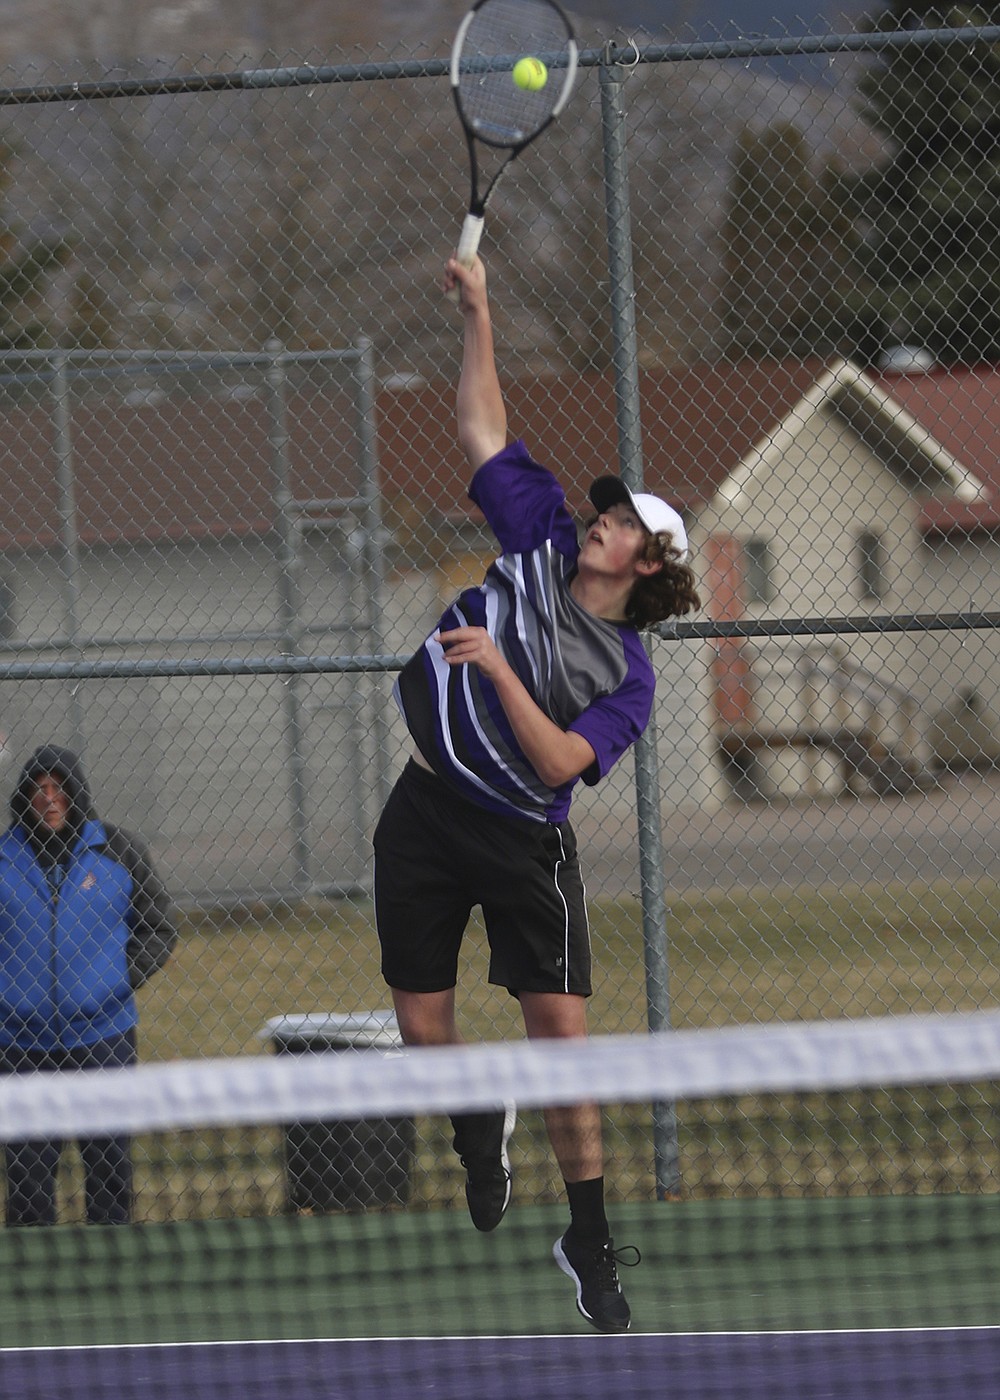 Michael Smith serves during his singles match against Libby's Ryker McElmurry. (Courtesy of Bob Gunderson)